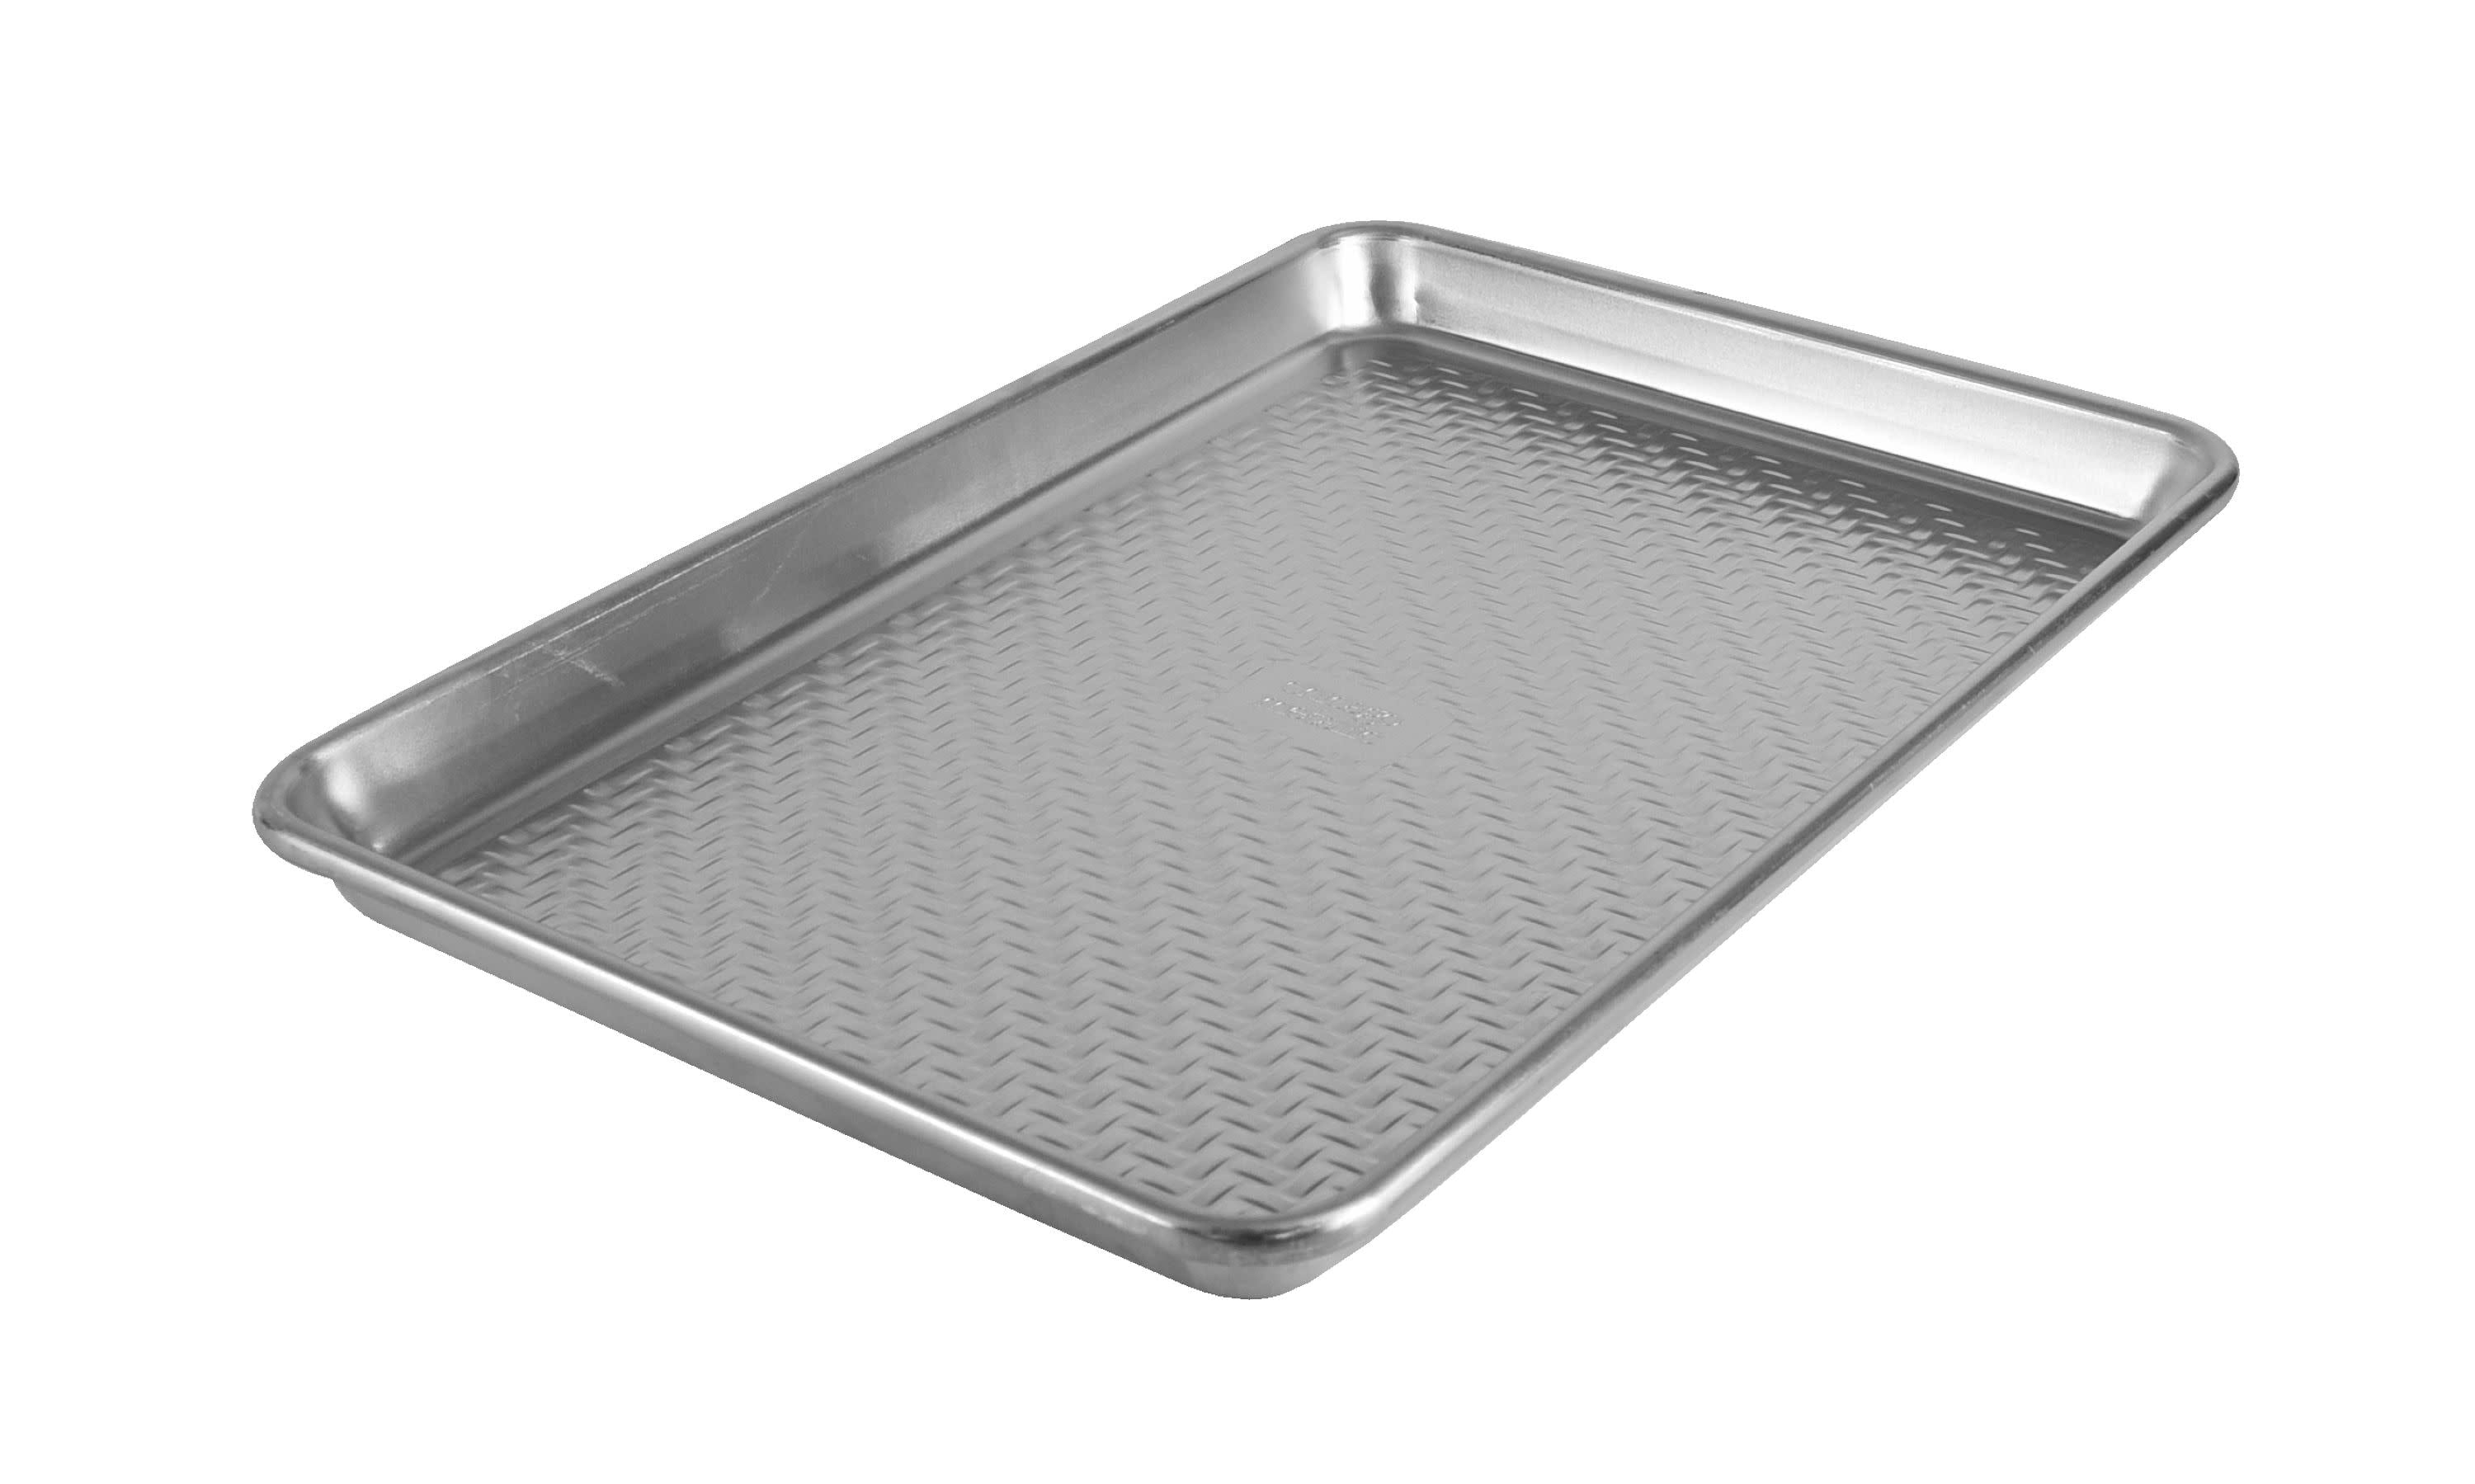 Chicago Metallic Commercial II Uncoated True Jelly Roll Pan, 15-inch by  10-inch